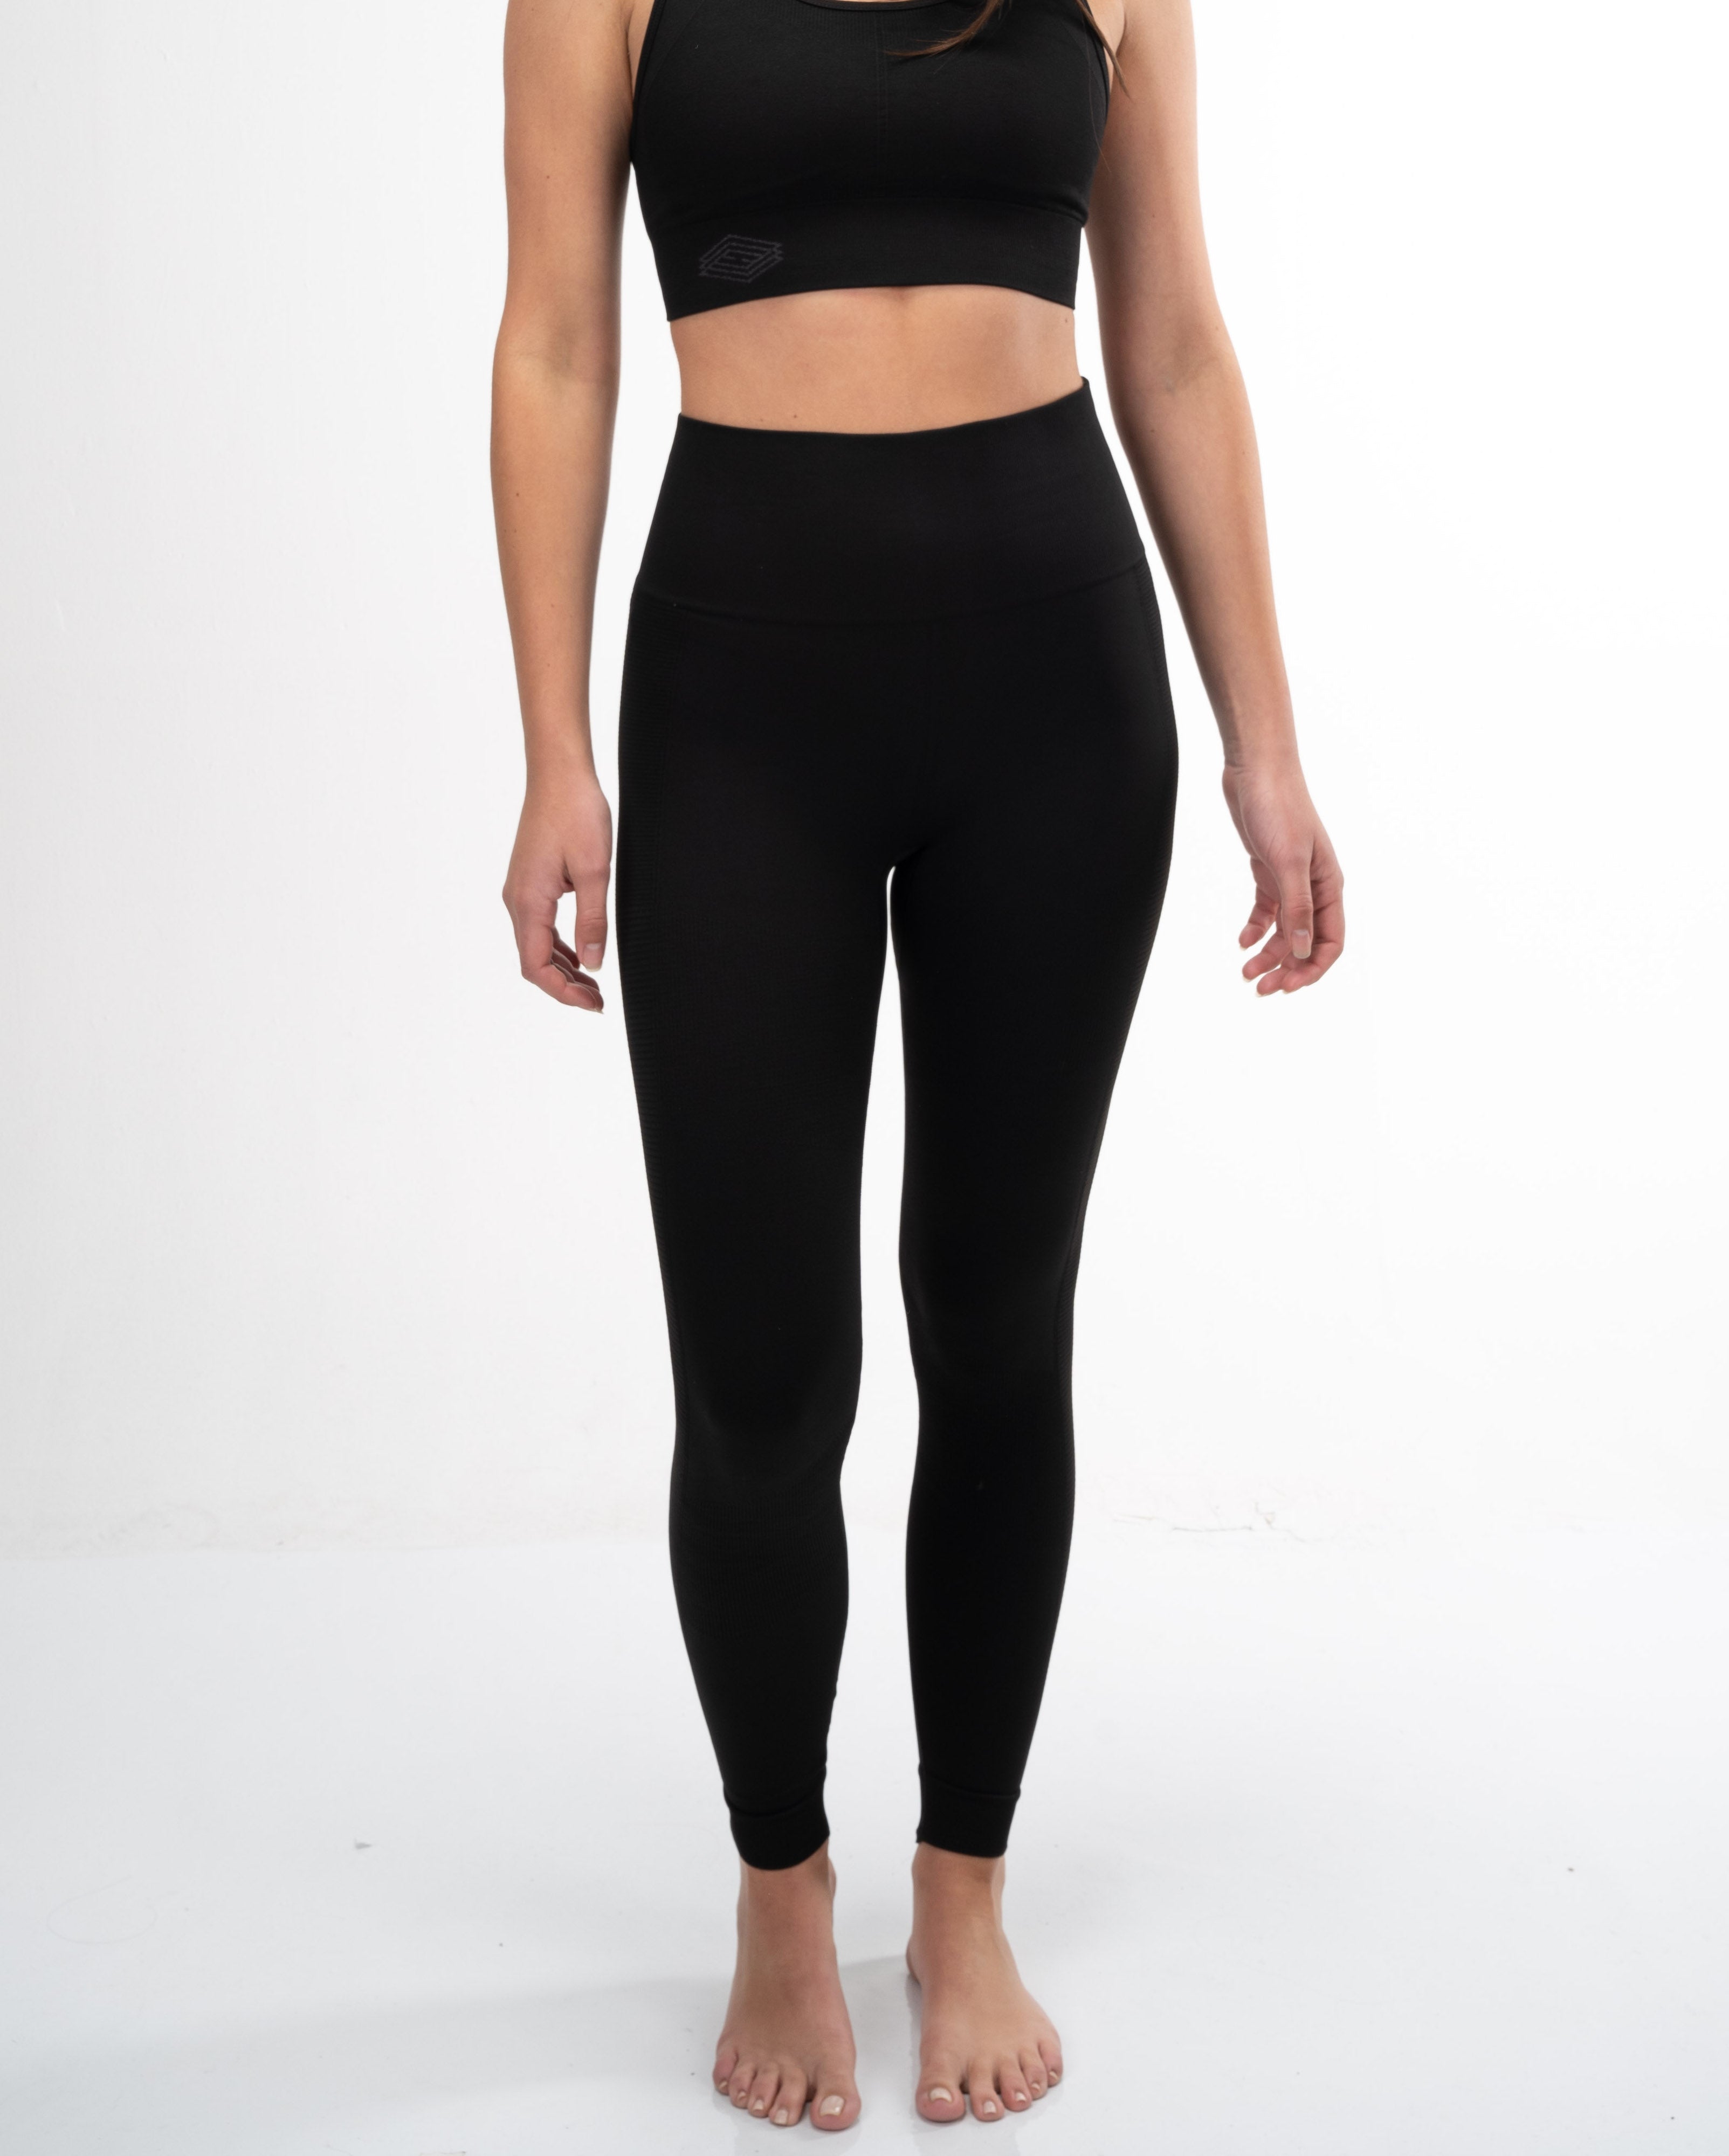 Just as good as lululemon!'  shoppers love how these $26 high-waisted  leggings are slimming, sweat-wicking and supportive (and they make your  butt look peachy)